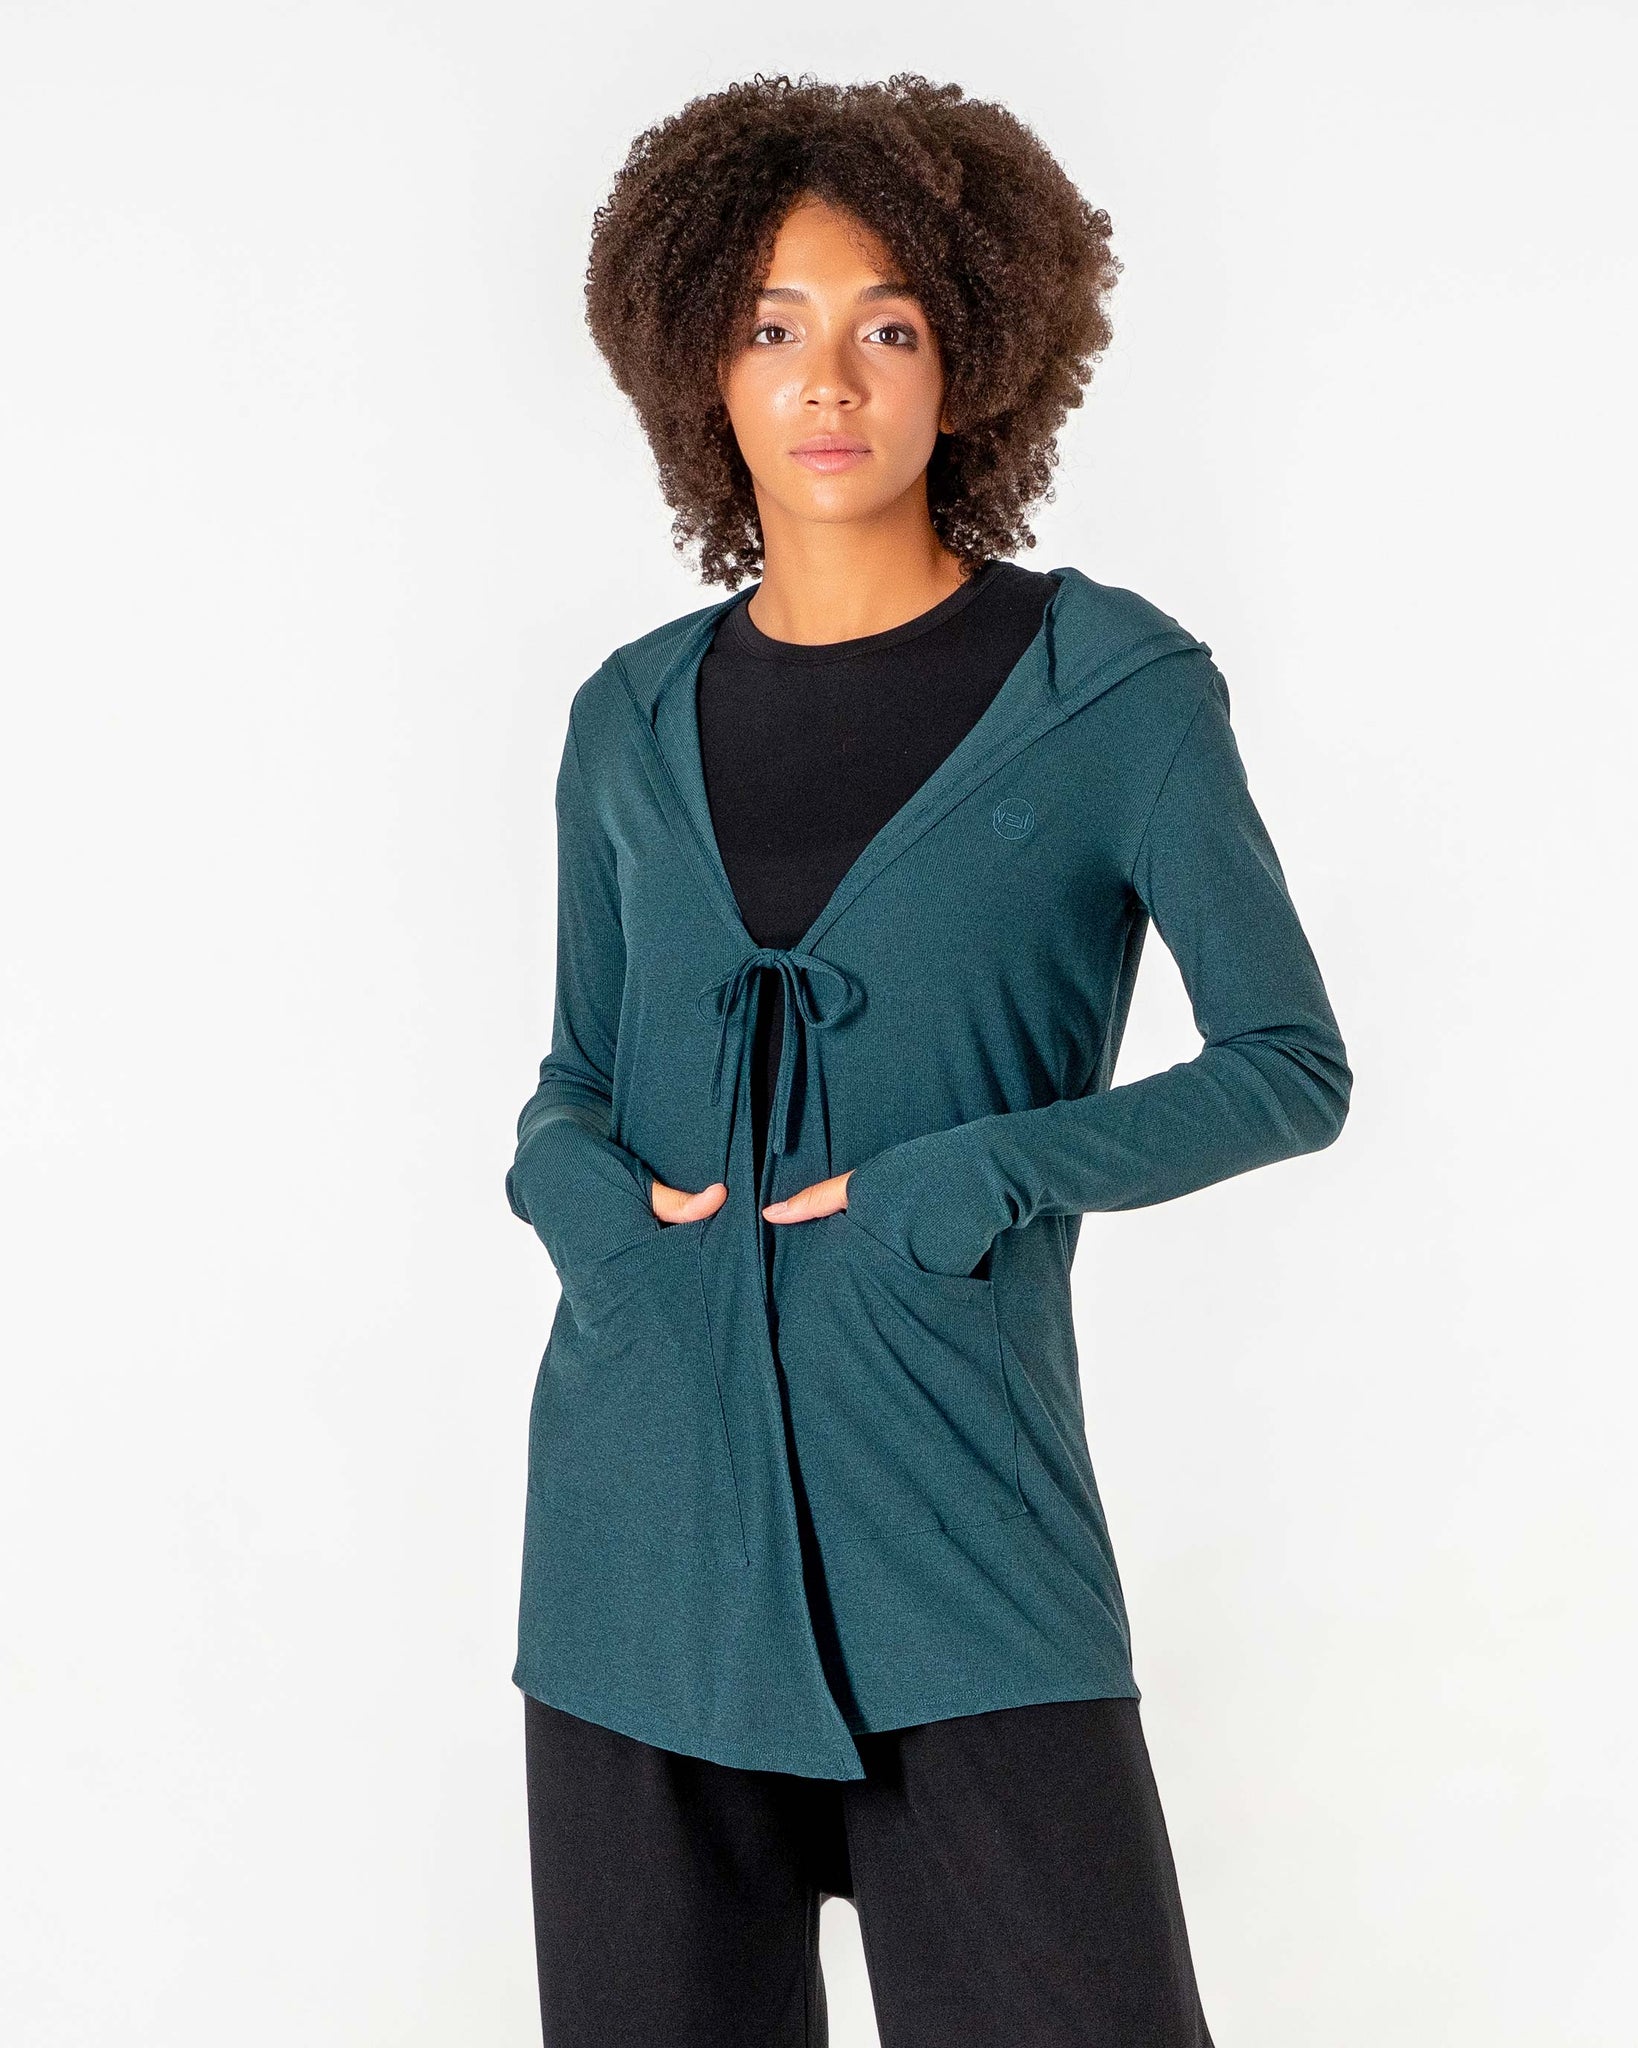 Move It Cardigan in emerald green by Veil Garments. Modest activewear collection.